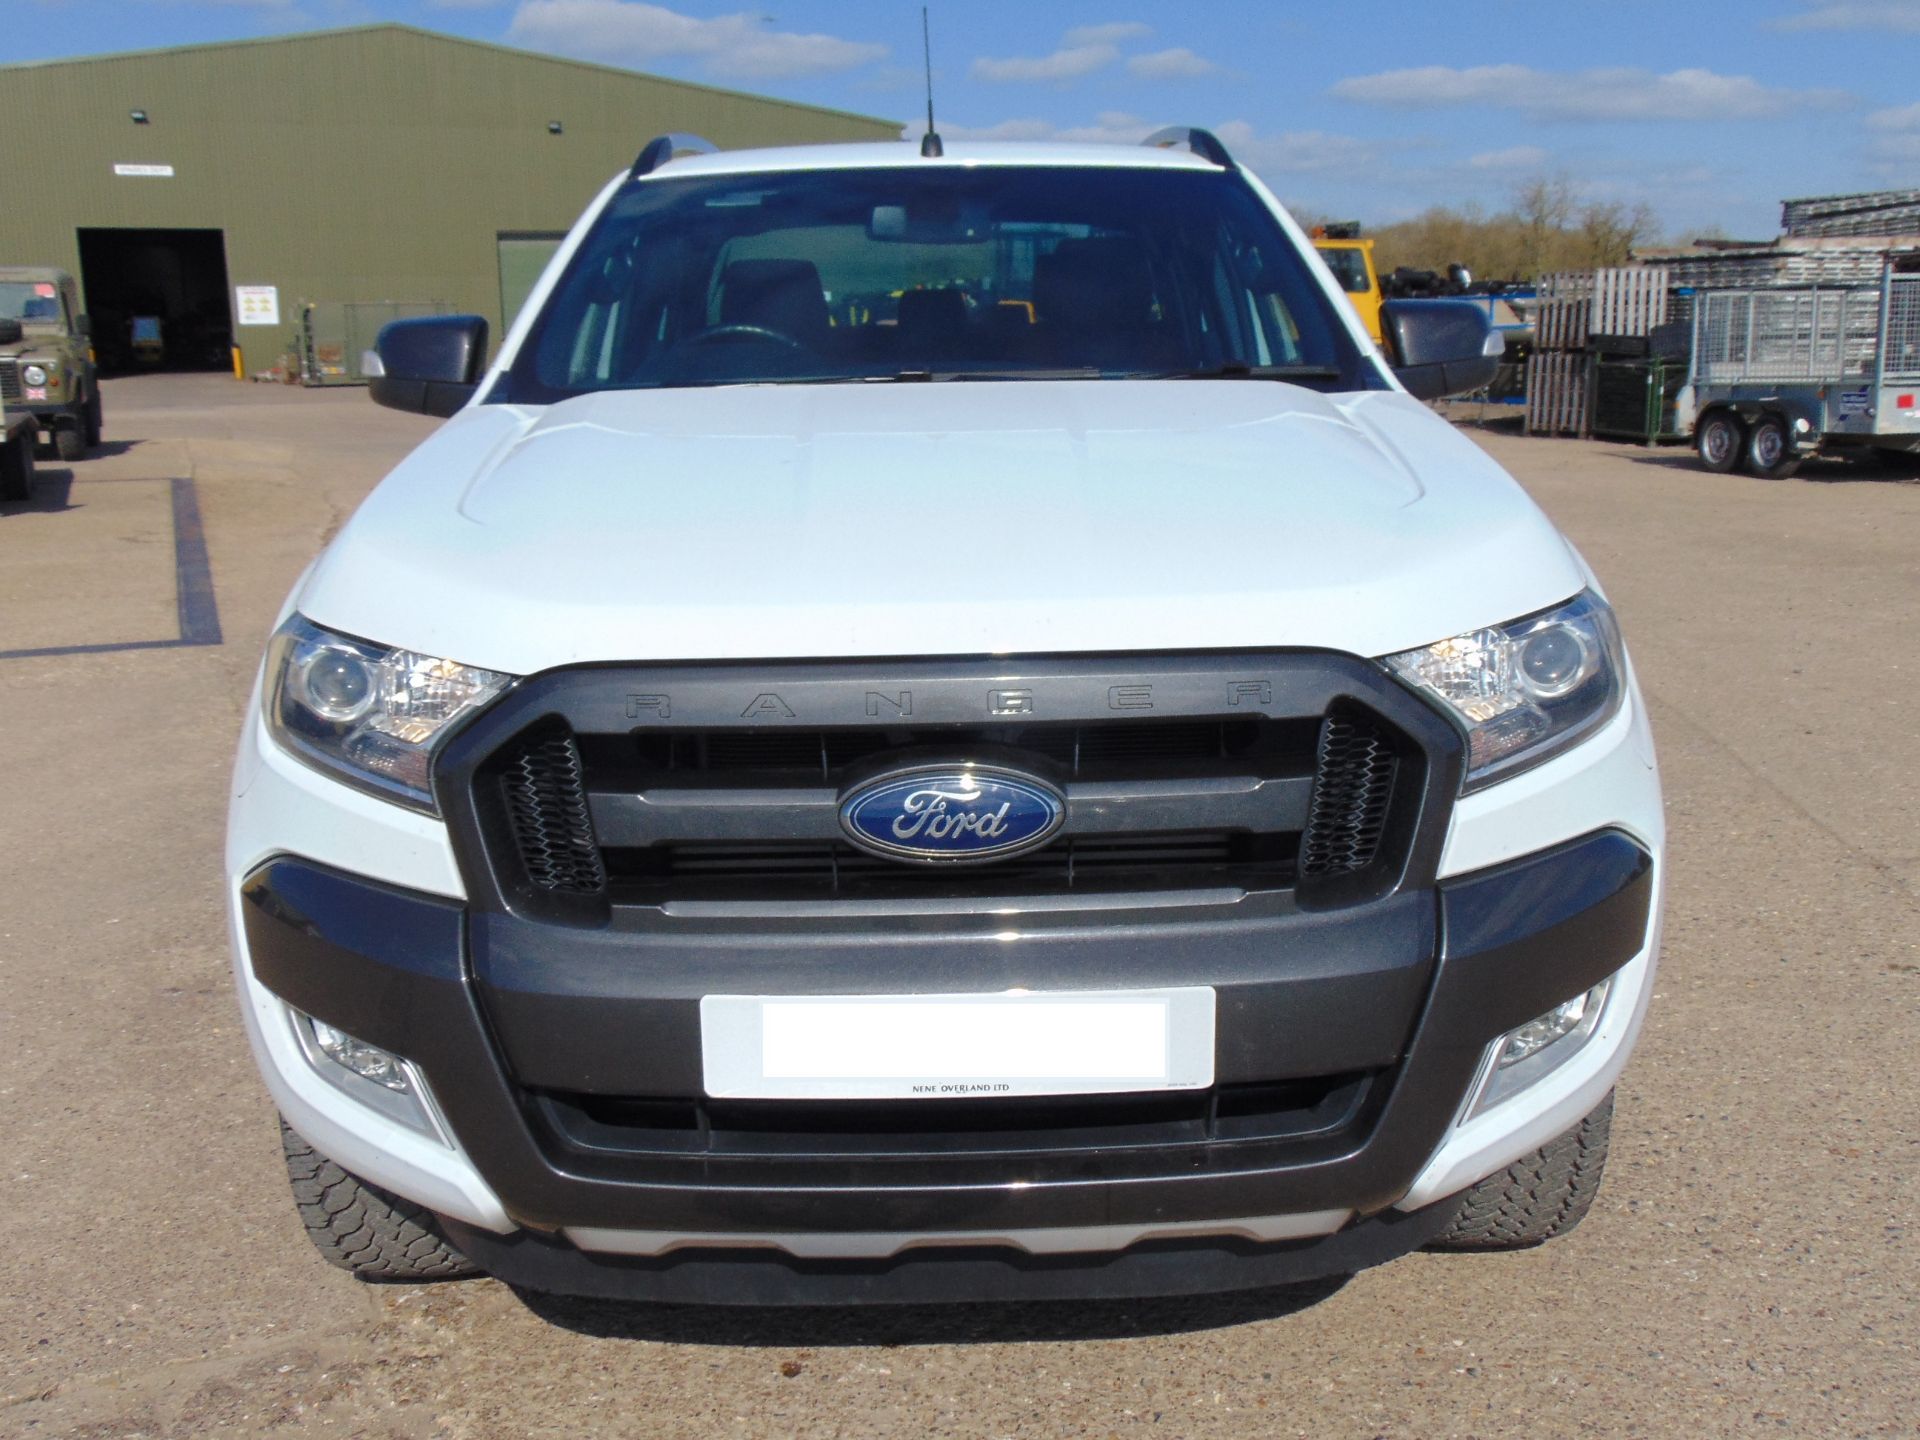 2016 Ford Ranger 3.2 Wildtrak 4x4 Double Cab Pickup in Frozen white - Image 2 of 36